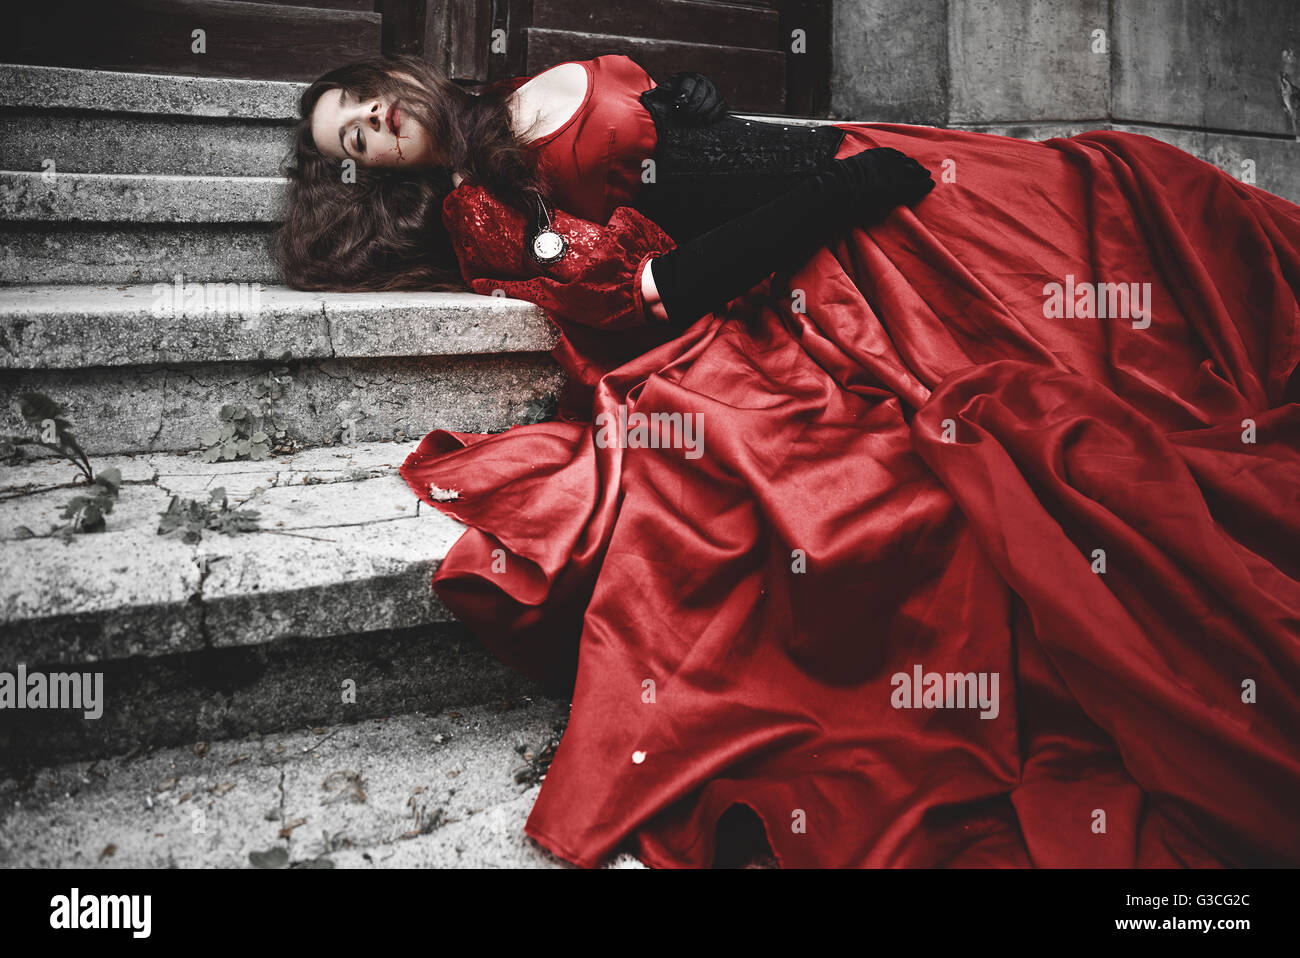 Lying and bleeding woman in a red Victorian dress Stock Photo